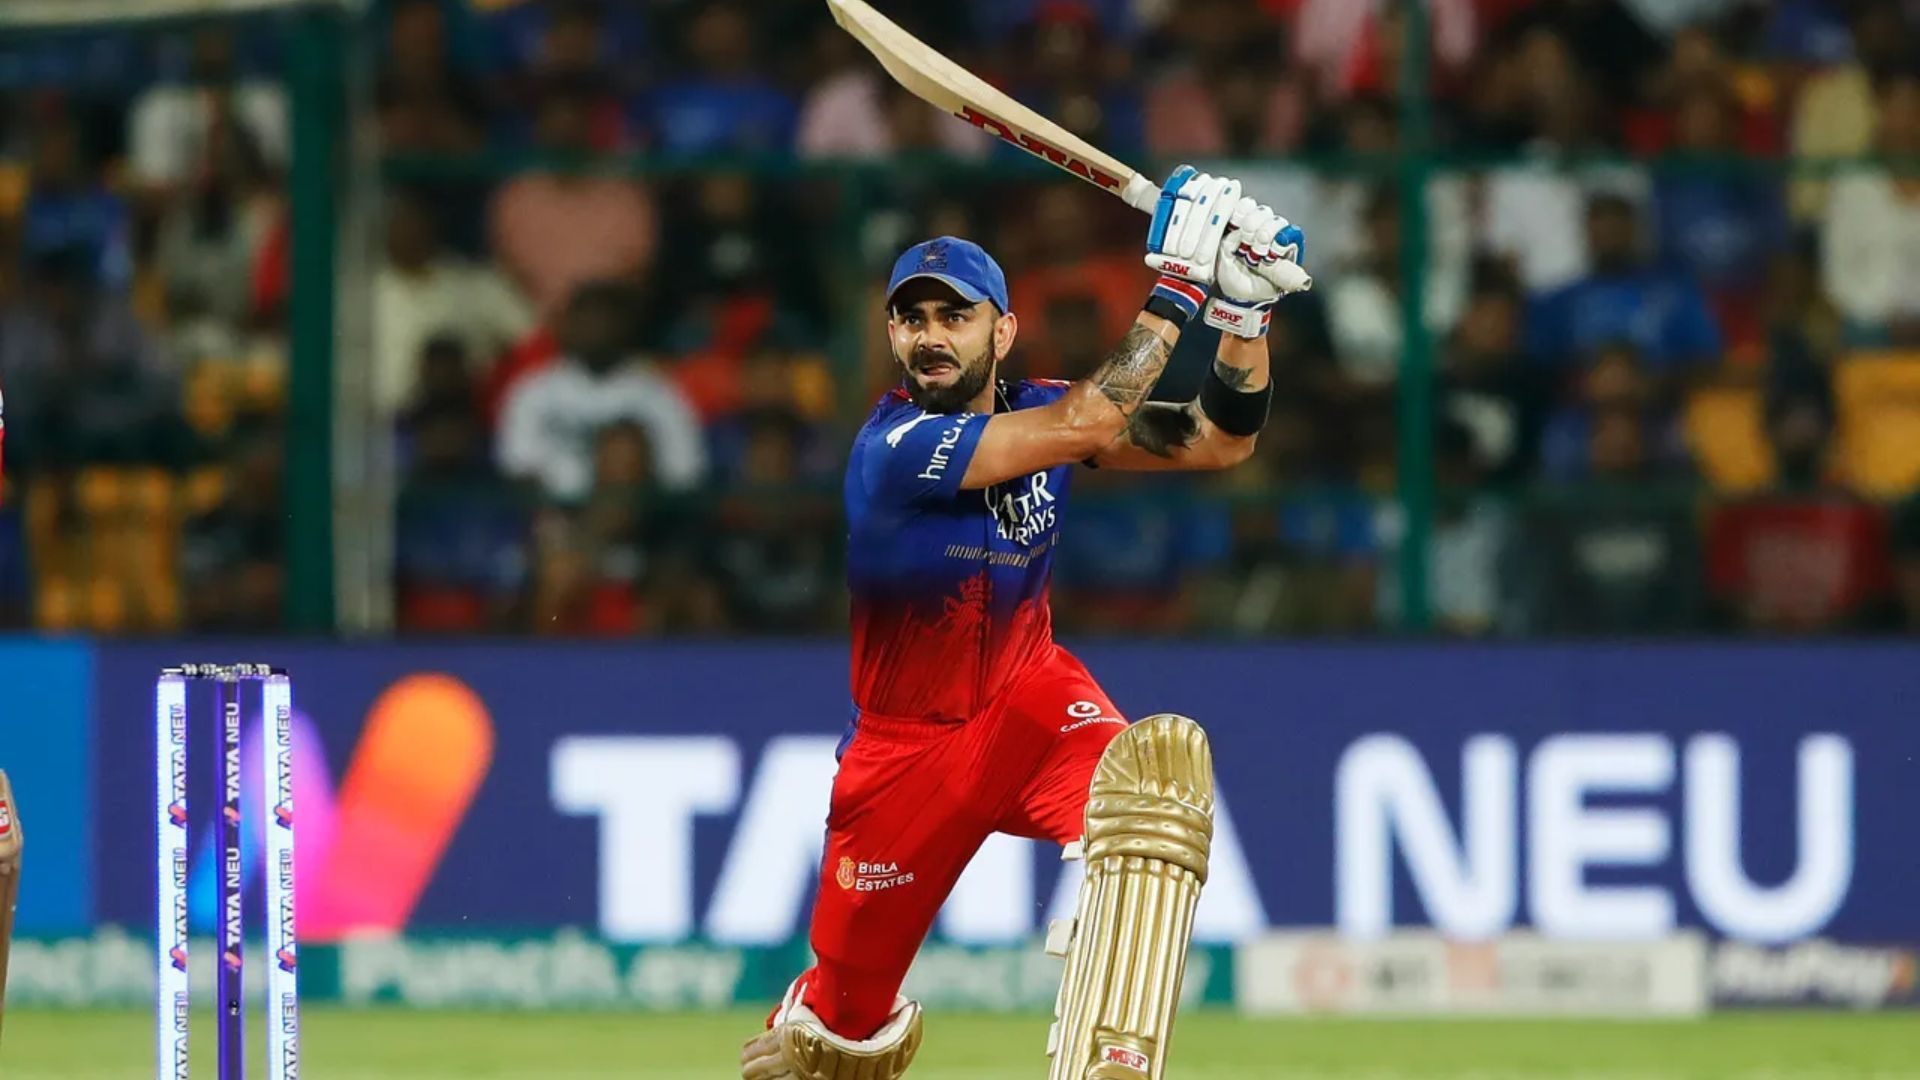 Virat Kohli has pretty much been a lone warrior for RCB with the bat